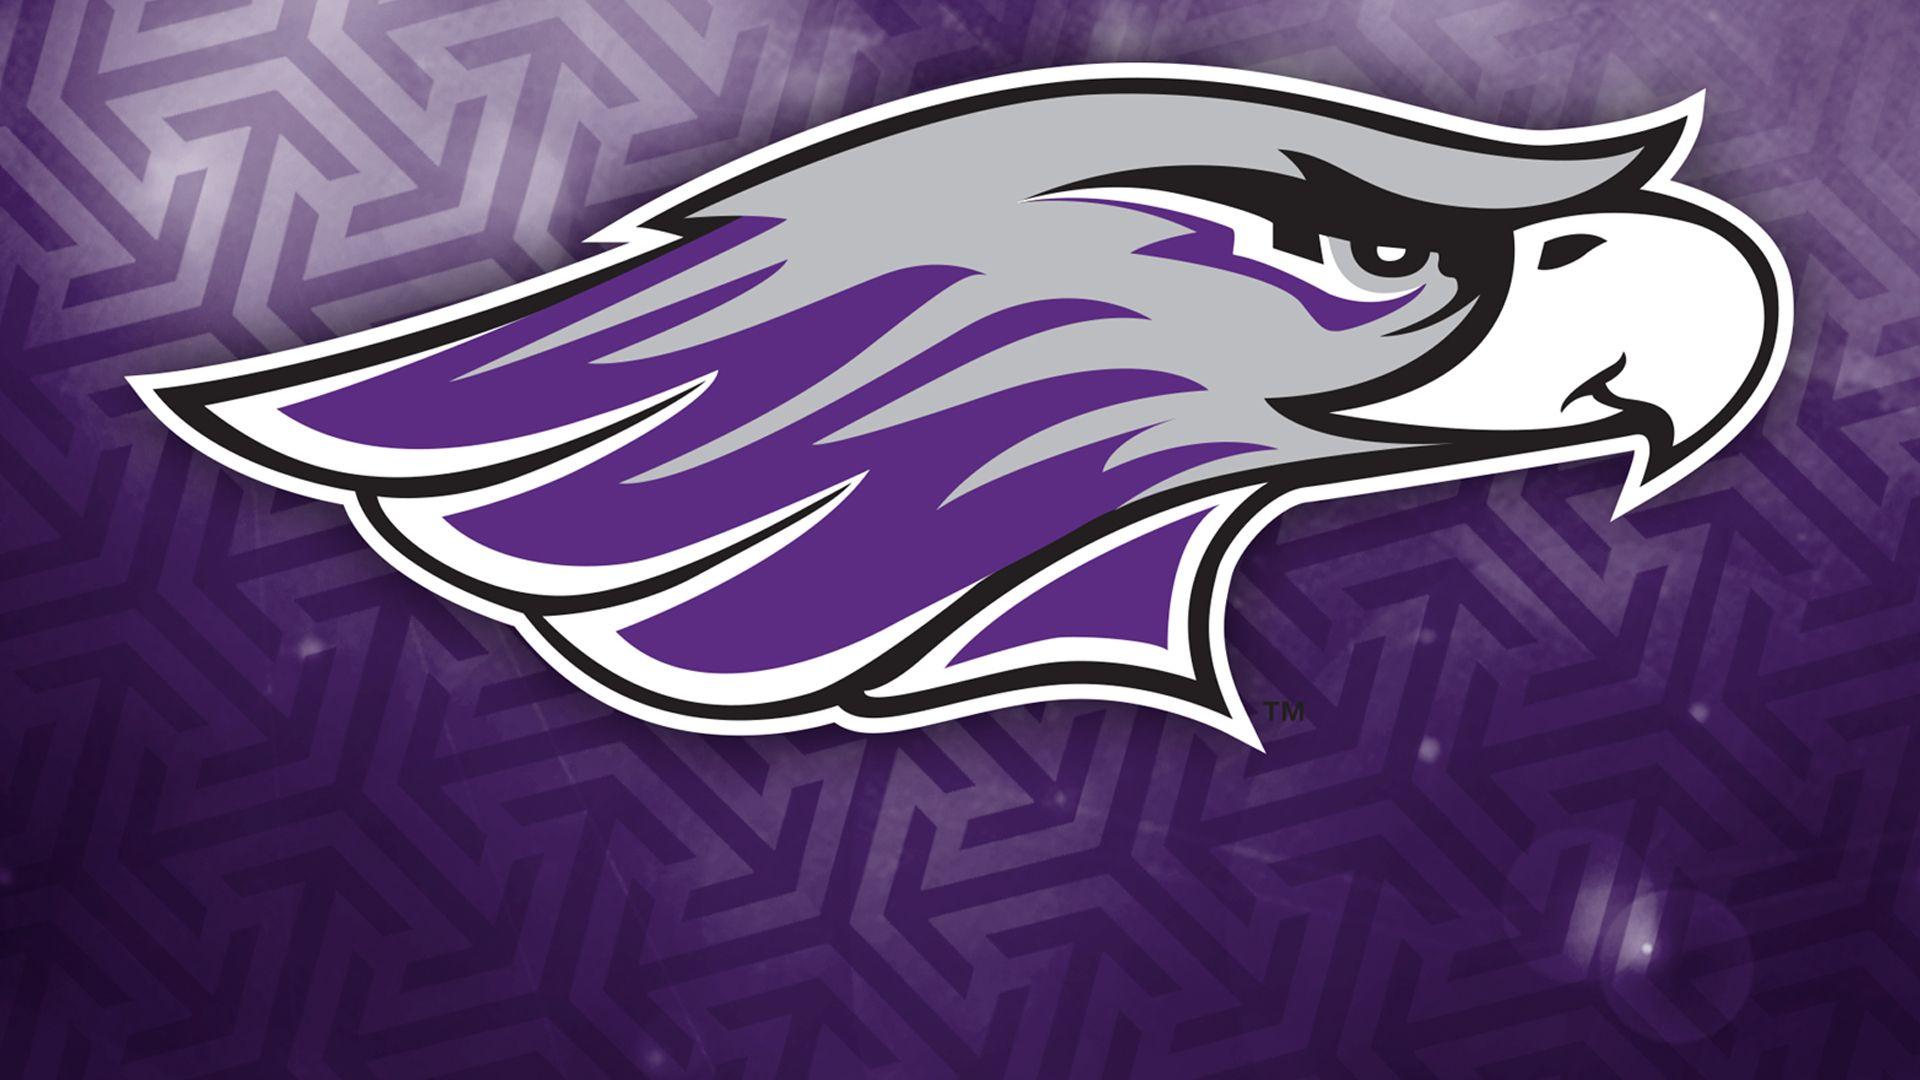 Whitewater Logo - UW-Whitewater Announces 2019 Hall of Fame Class - Wisconsin ...